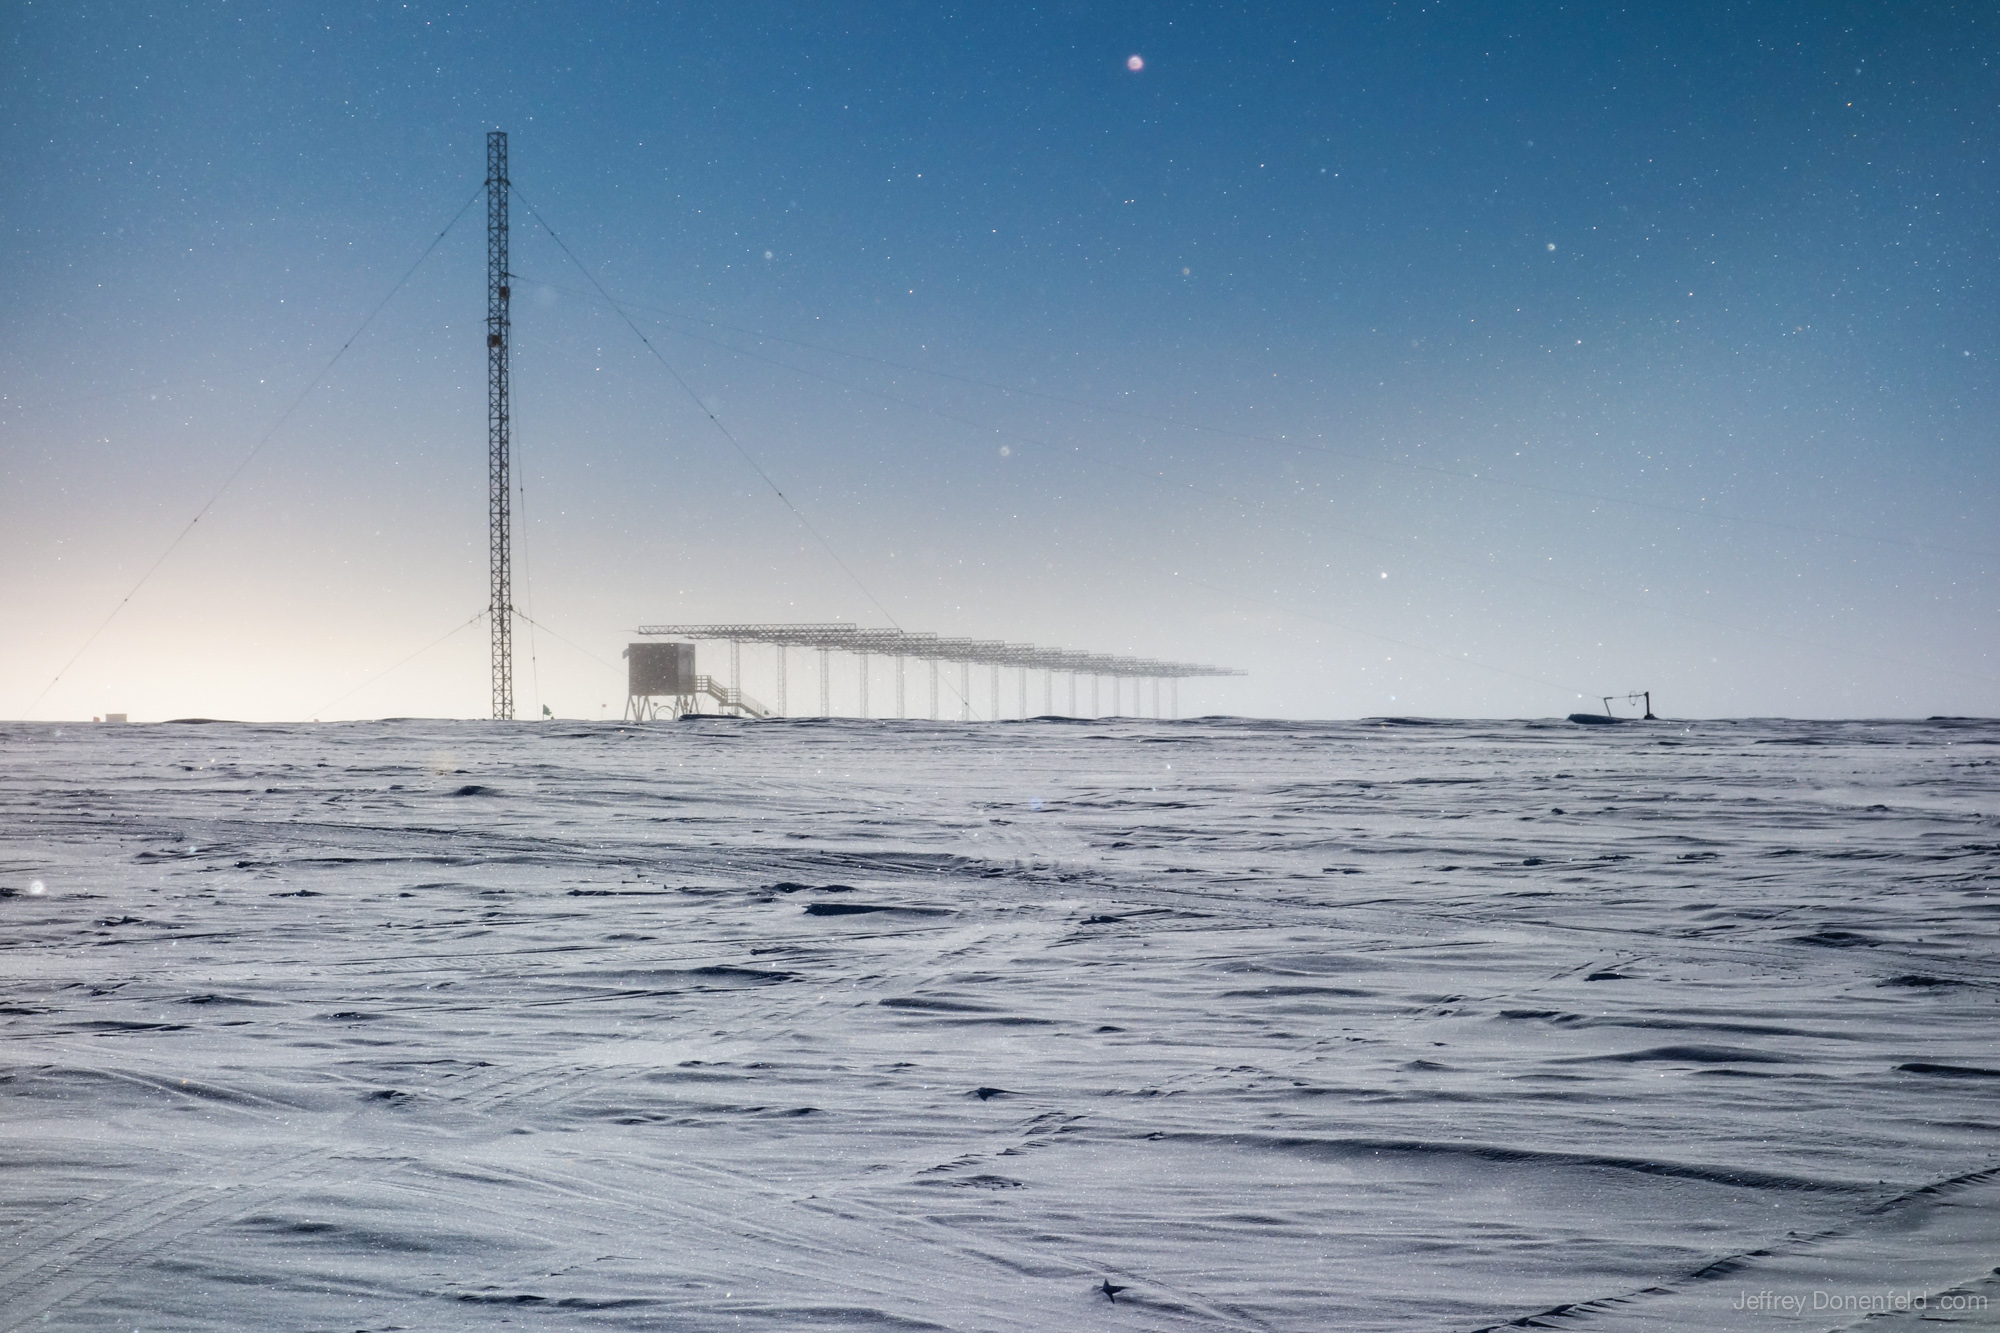 The Super Dual Auroral Radar Network Is Built At The South Pole